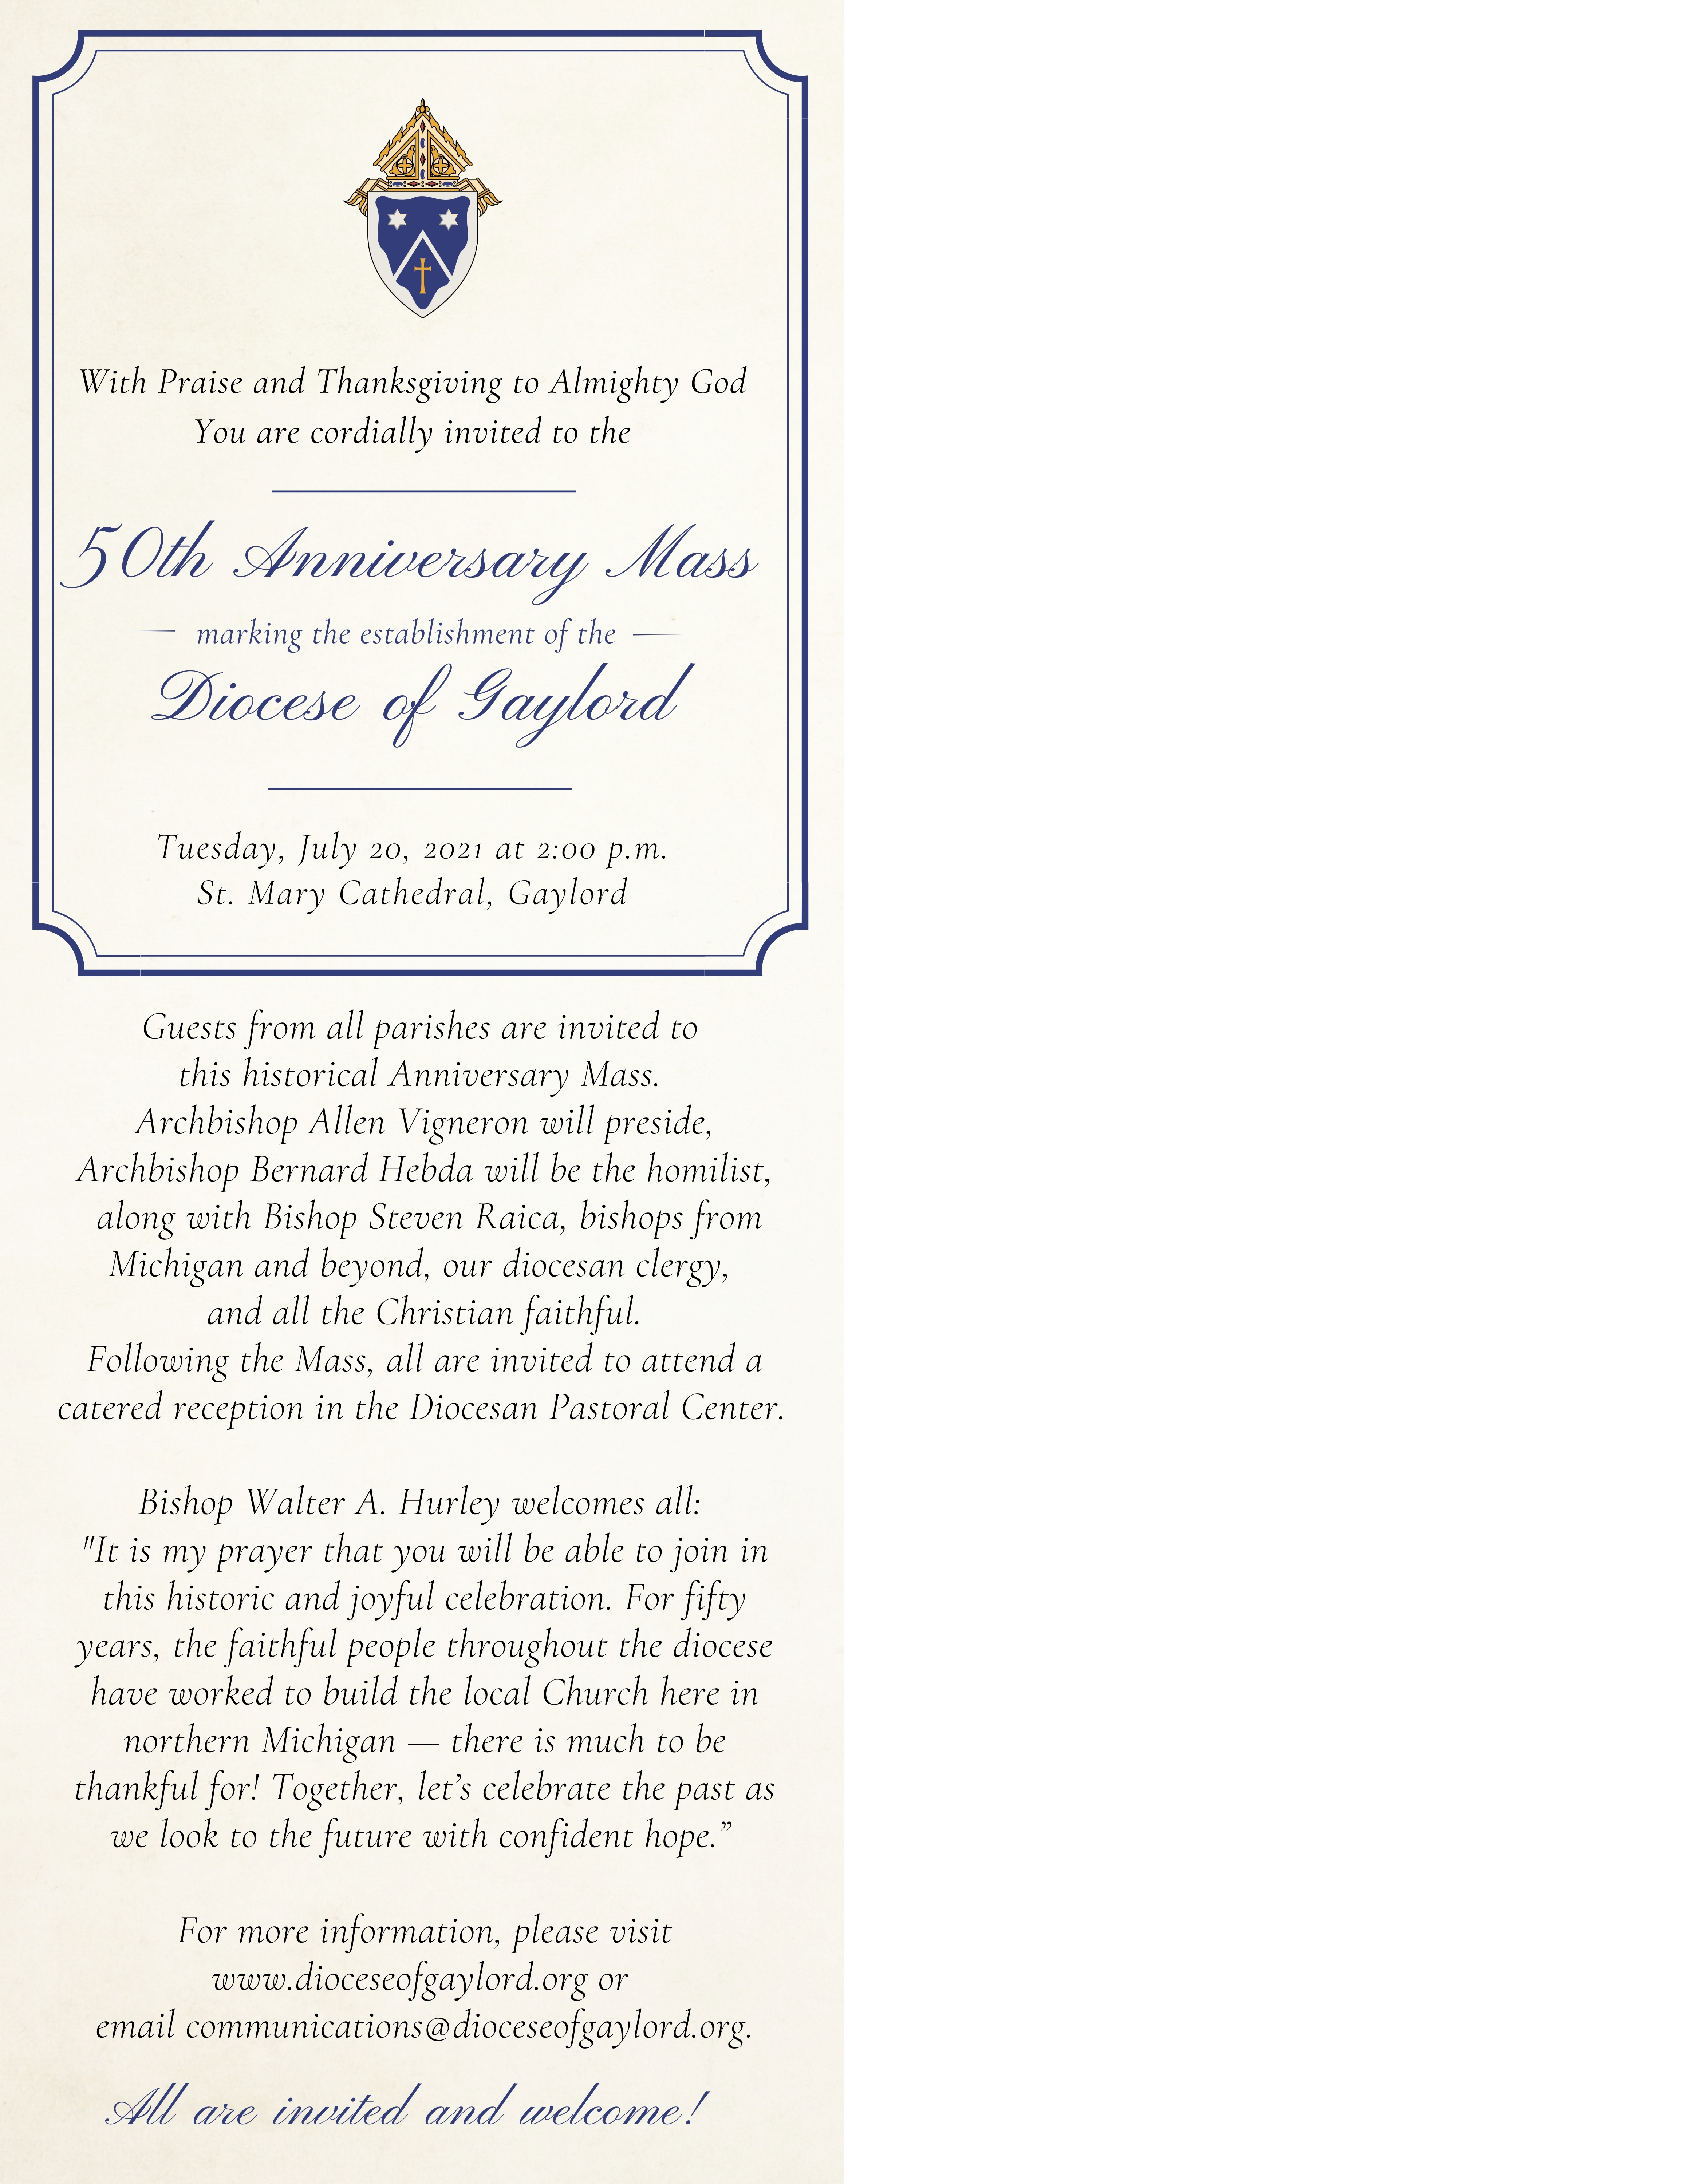 (JPG Image File) Half Page Bulletin Insert - 50th Anniversary of Diocese